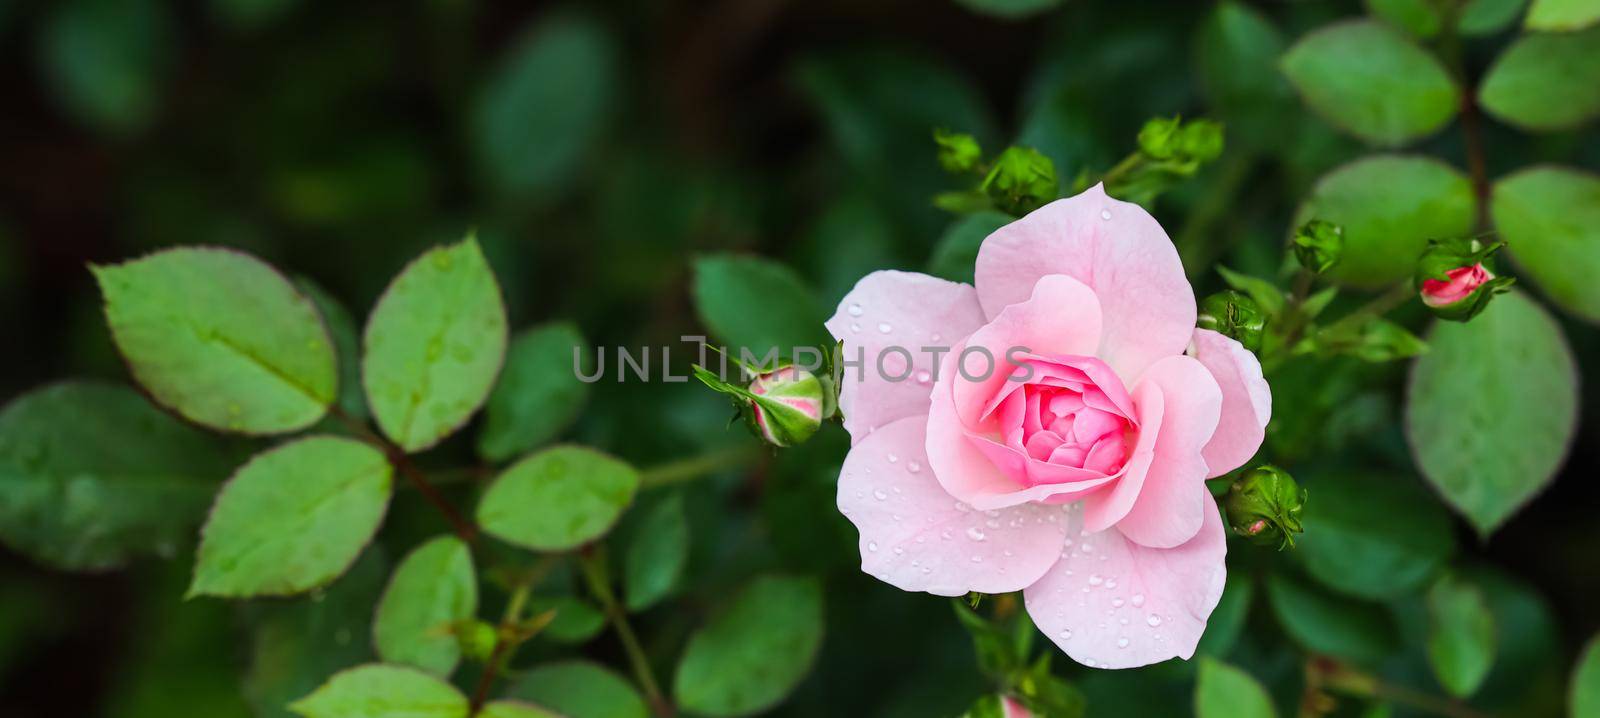 Soft pink rose Bonica with buds in the garden. Perfect for background of greeting cards for birthday, Valentine's Day and Mother's Day